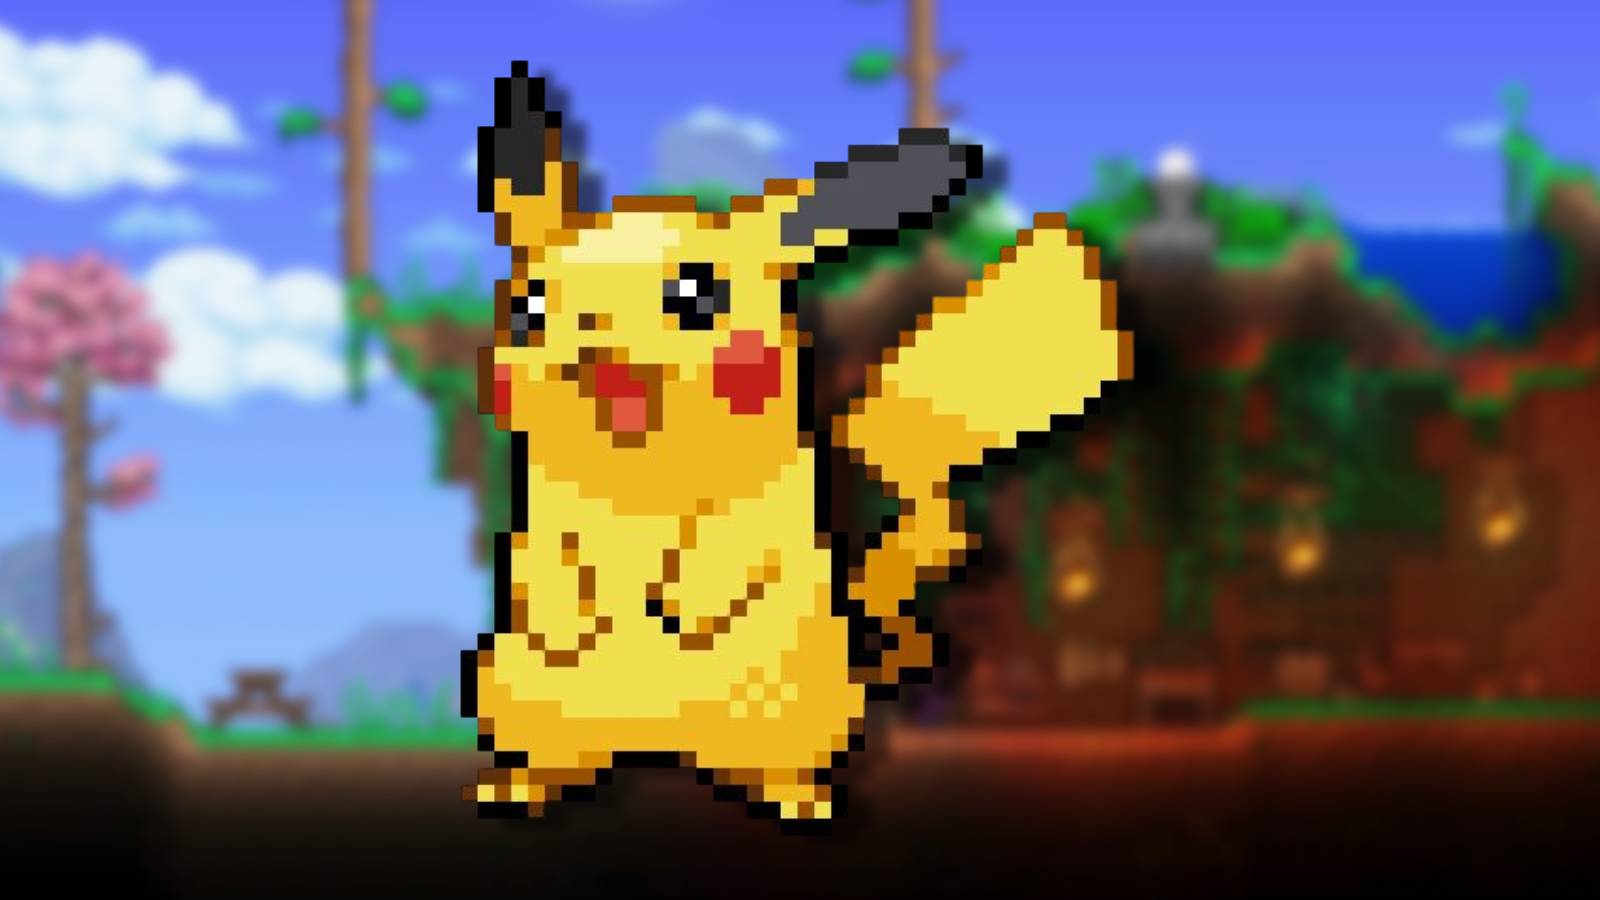 A pixelated sprite of Pikachu appears in front of a blurred screenshot of the game Terraria